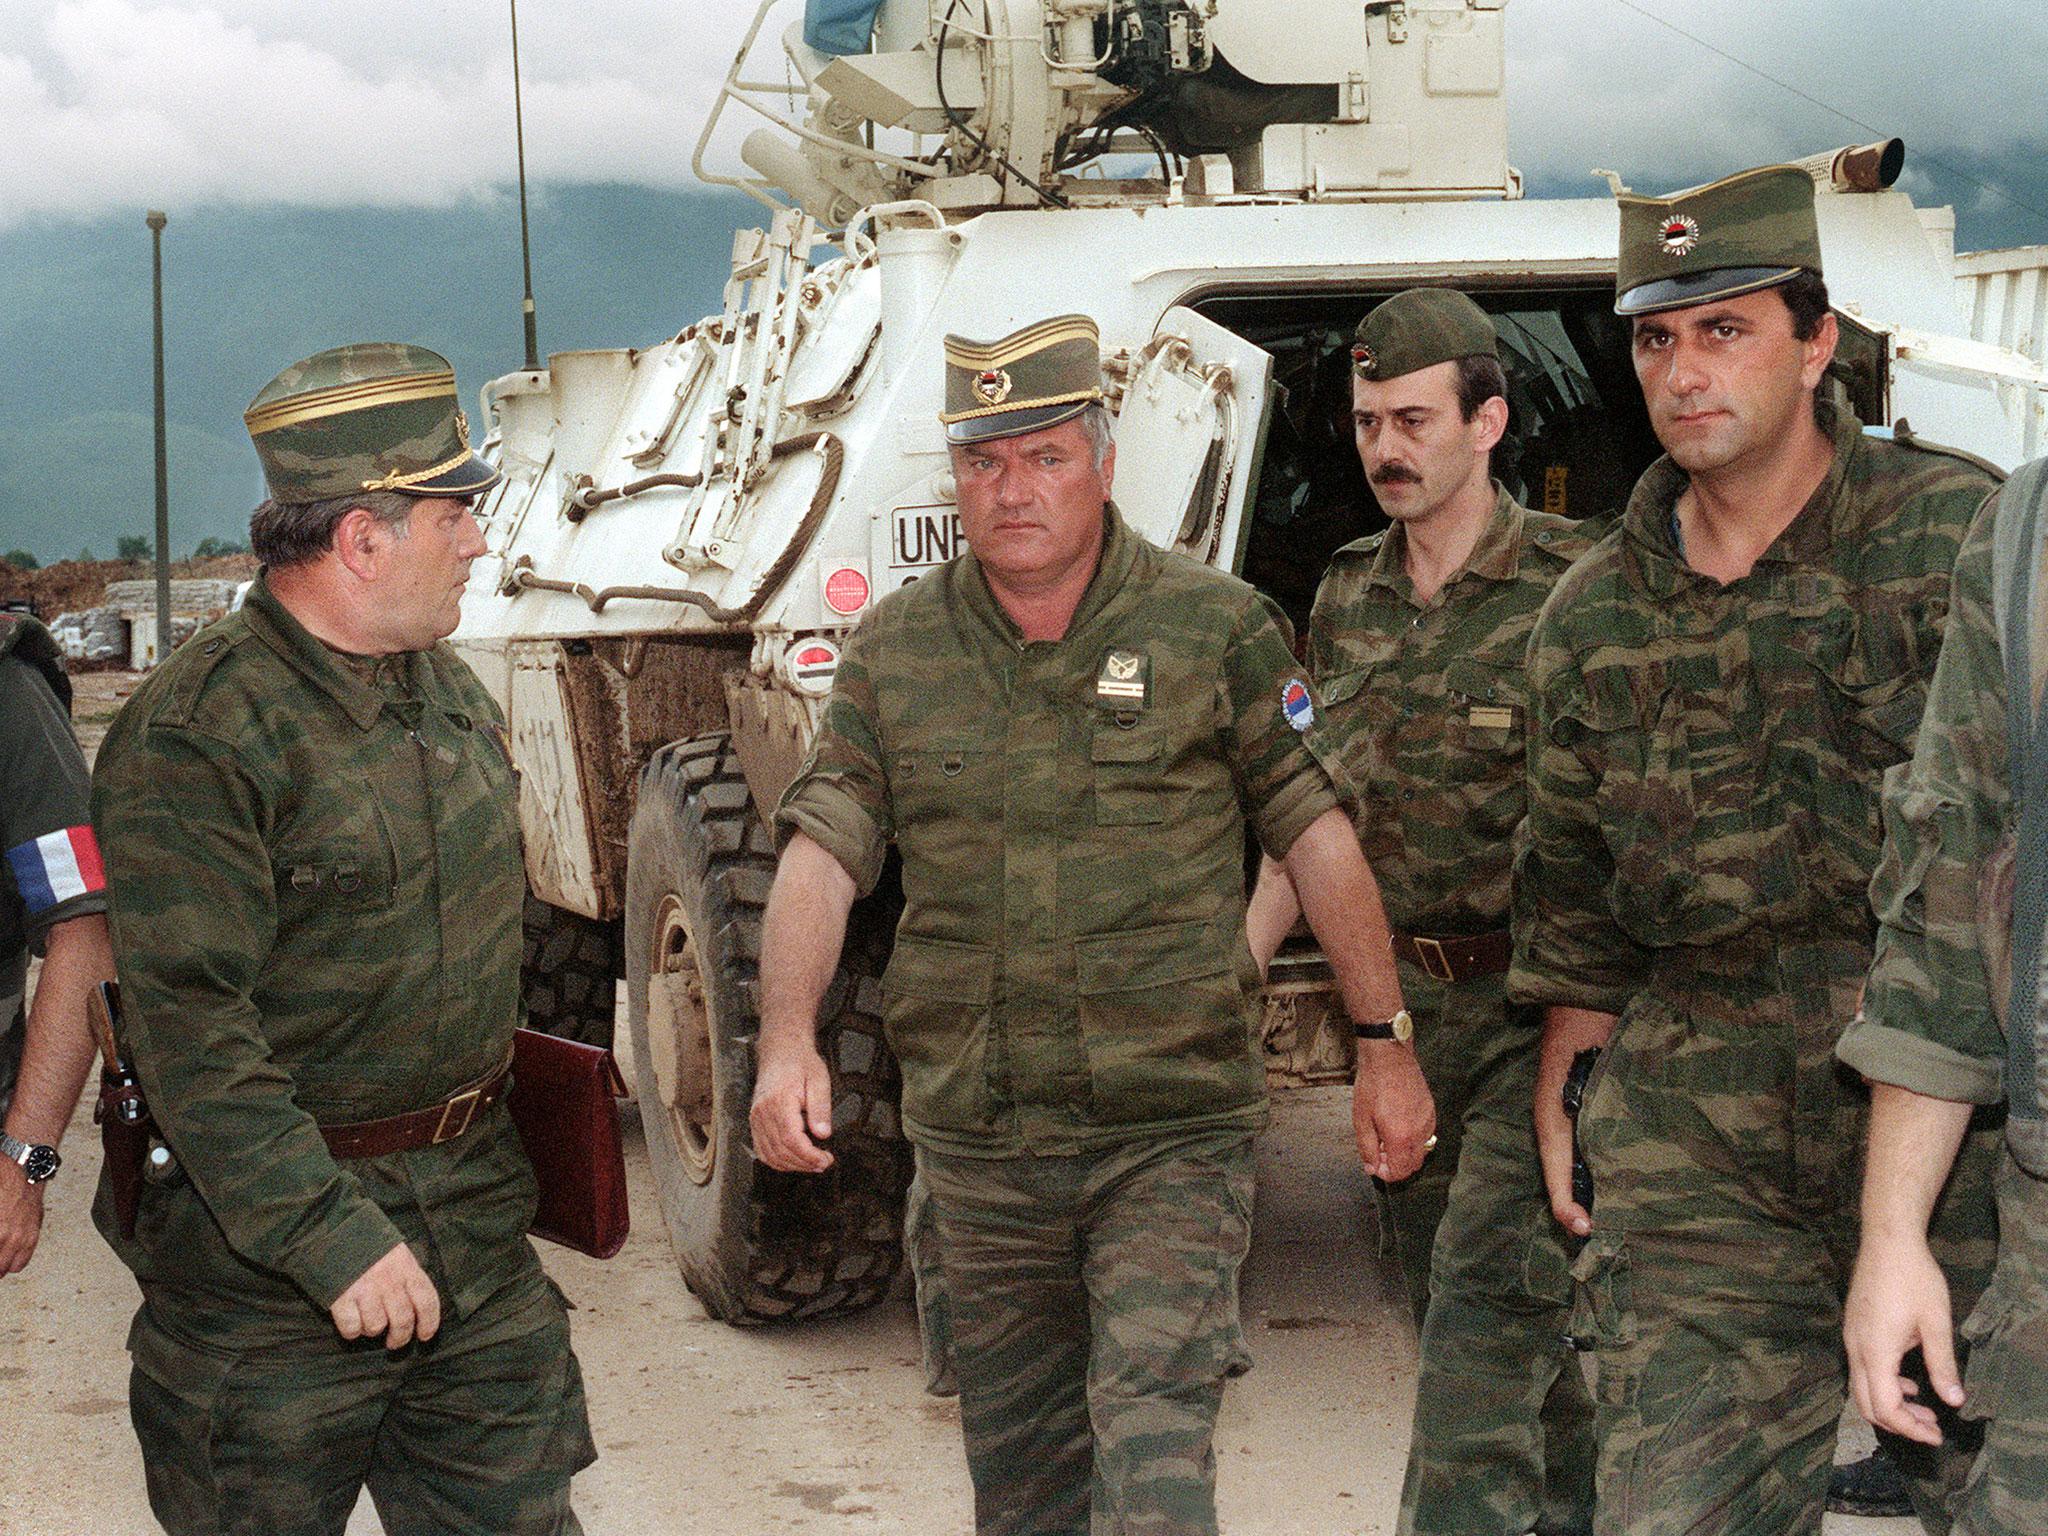 The ‘Butcher of Bosnia’ in 1994: ‘He could hardly hide his contempt for the international figures whose jobs were to keep this war from getting even worse’